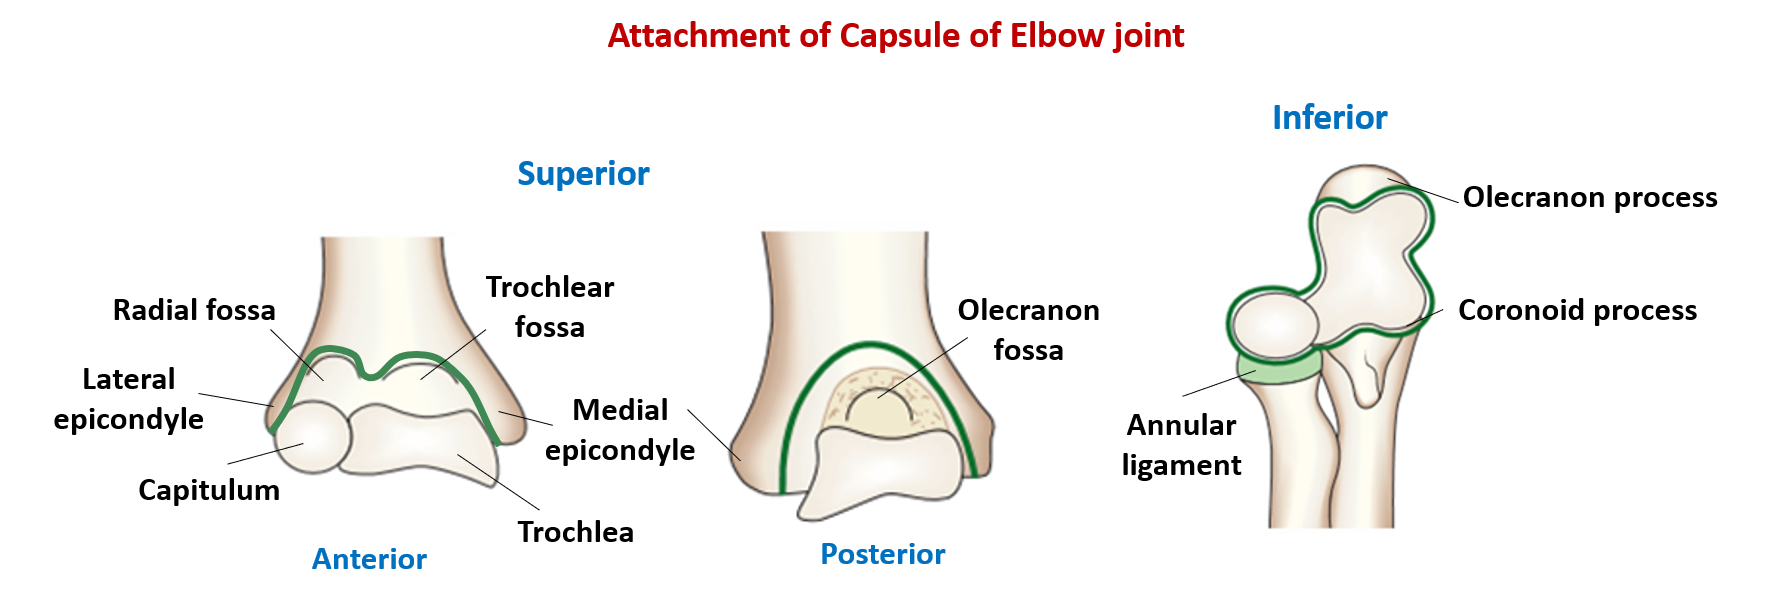 attachment of articular capsule of elbow joint